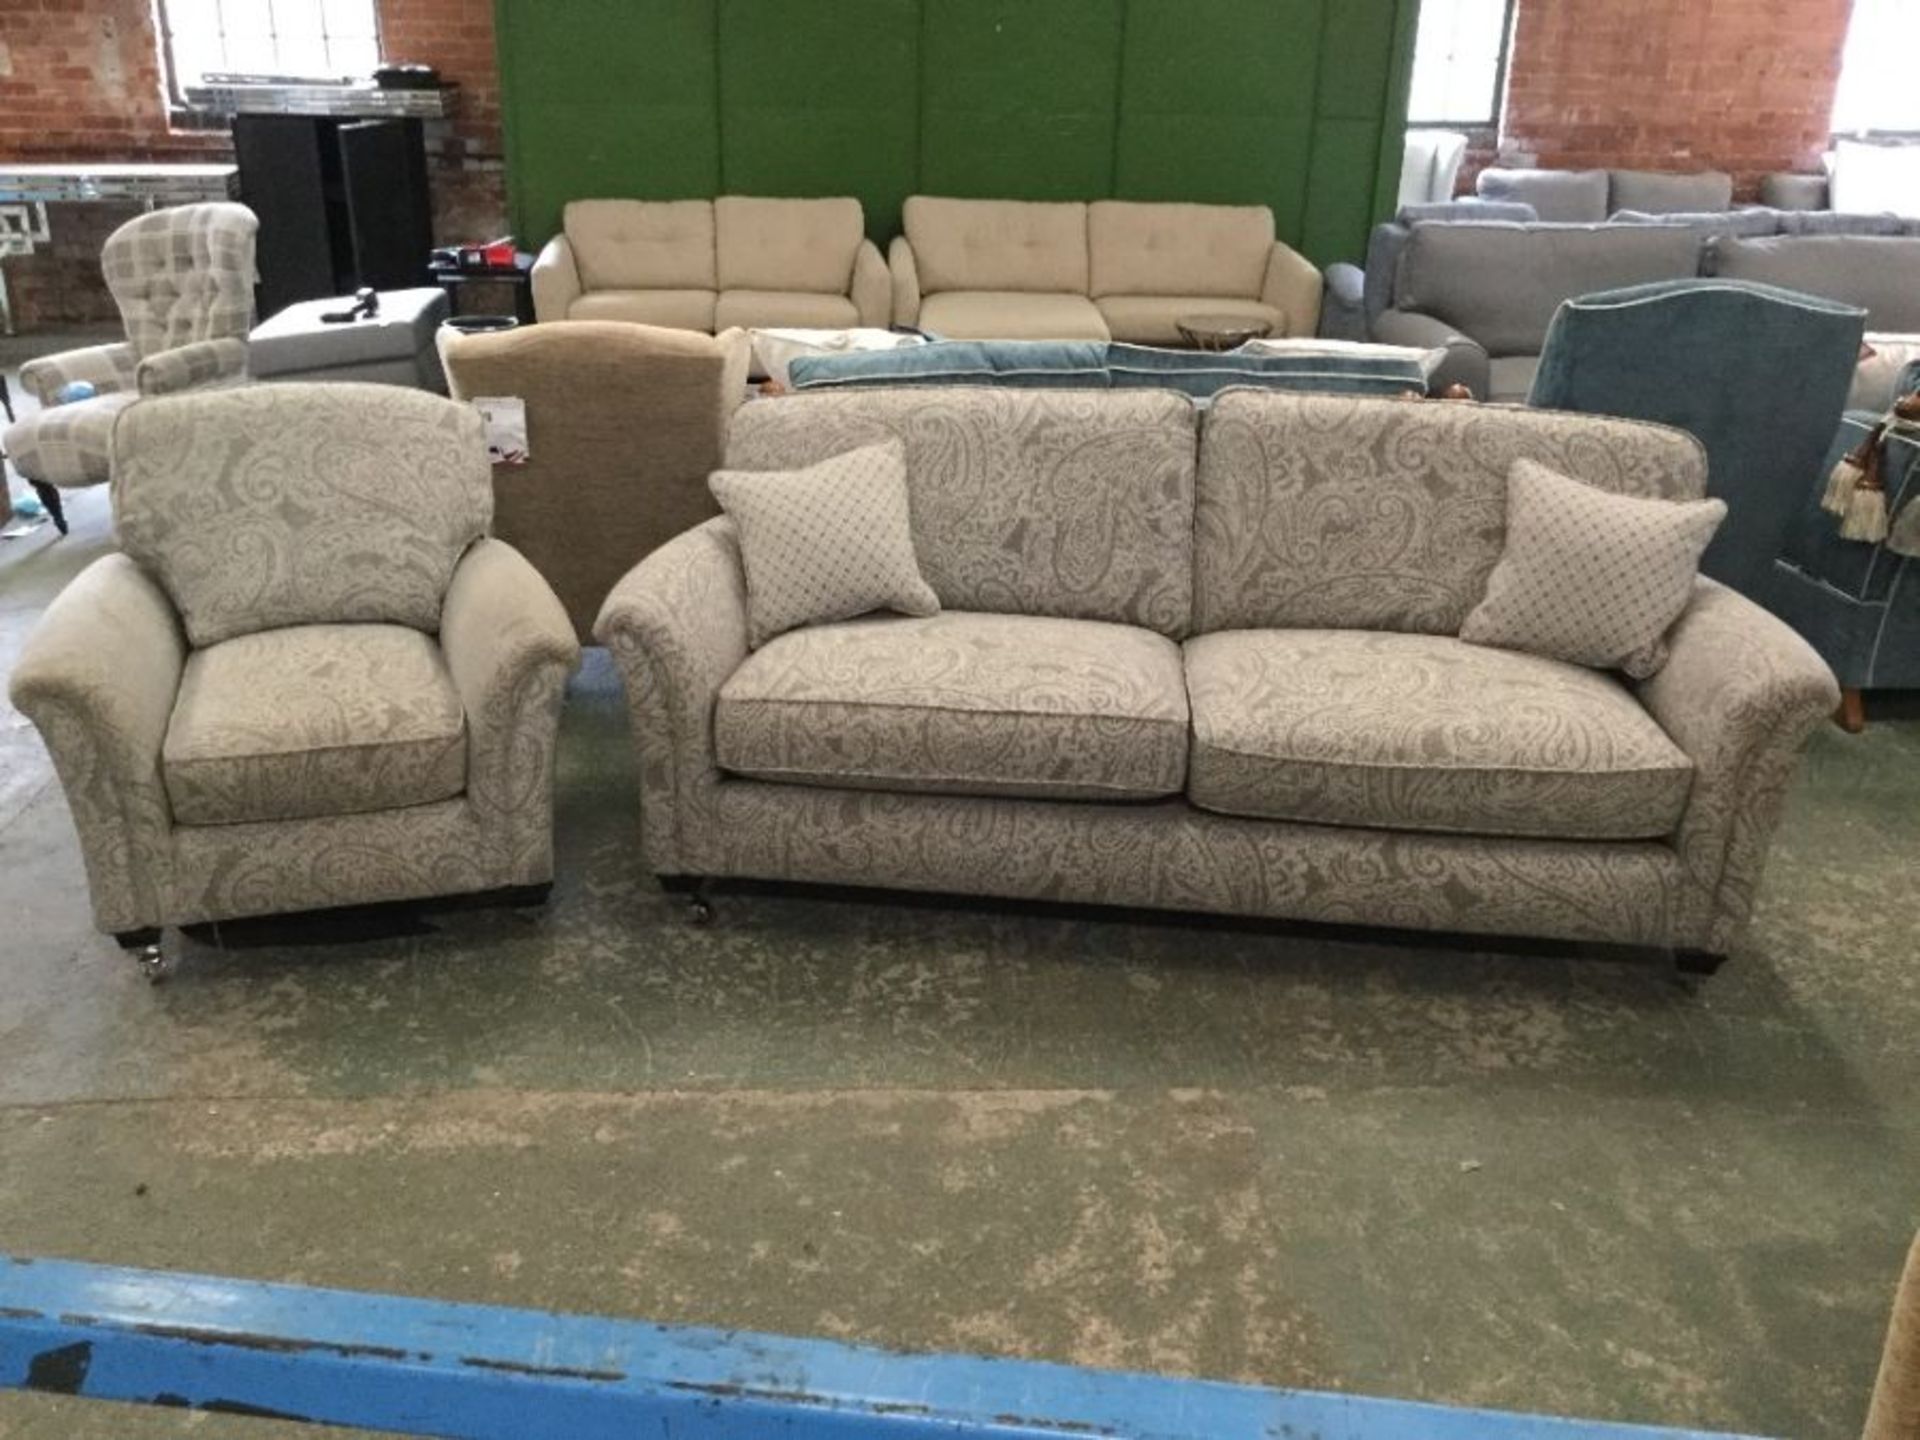 GREY PATTERNED 3 SEATER SOFA AND GREY FABRIC CHAIR